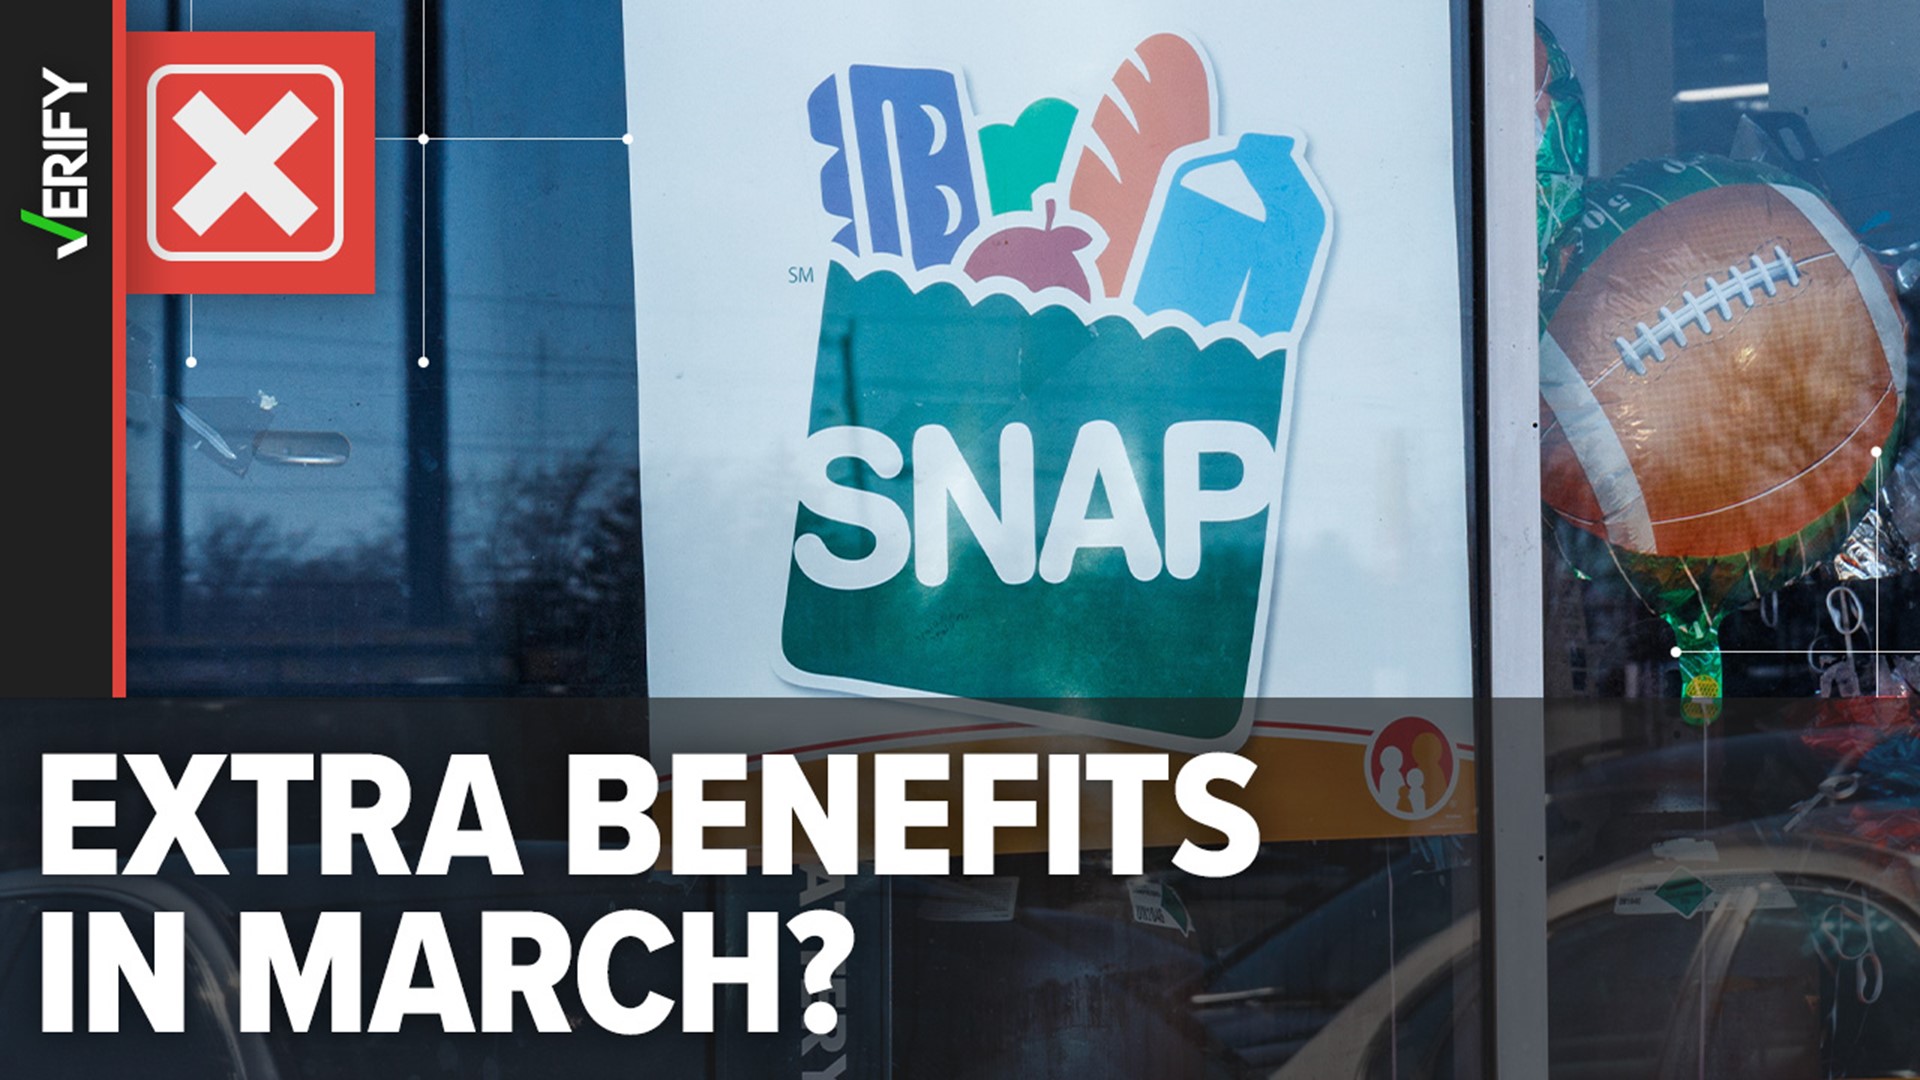 Extra SNAP benefits will not continue into March